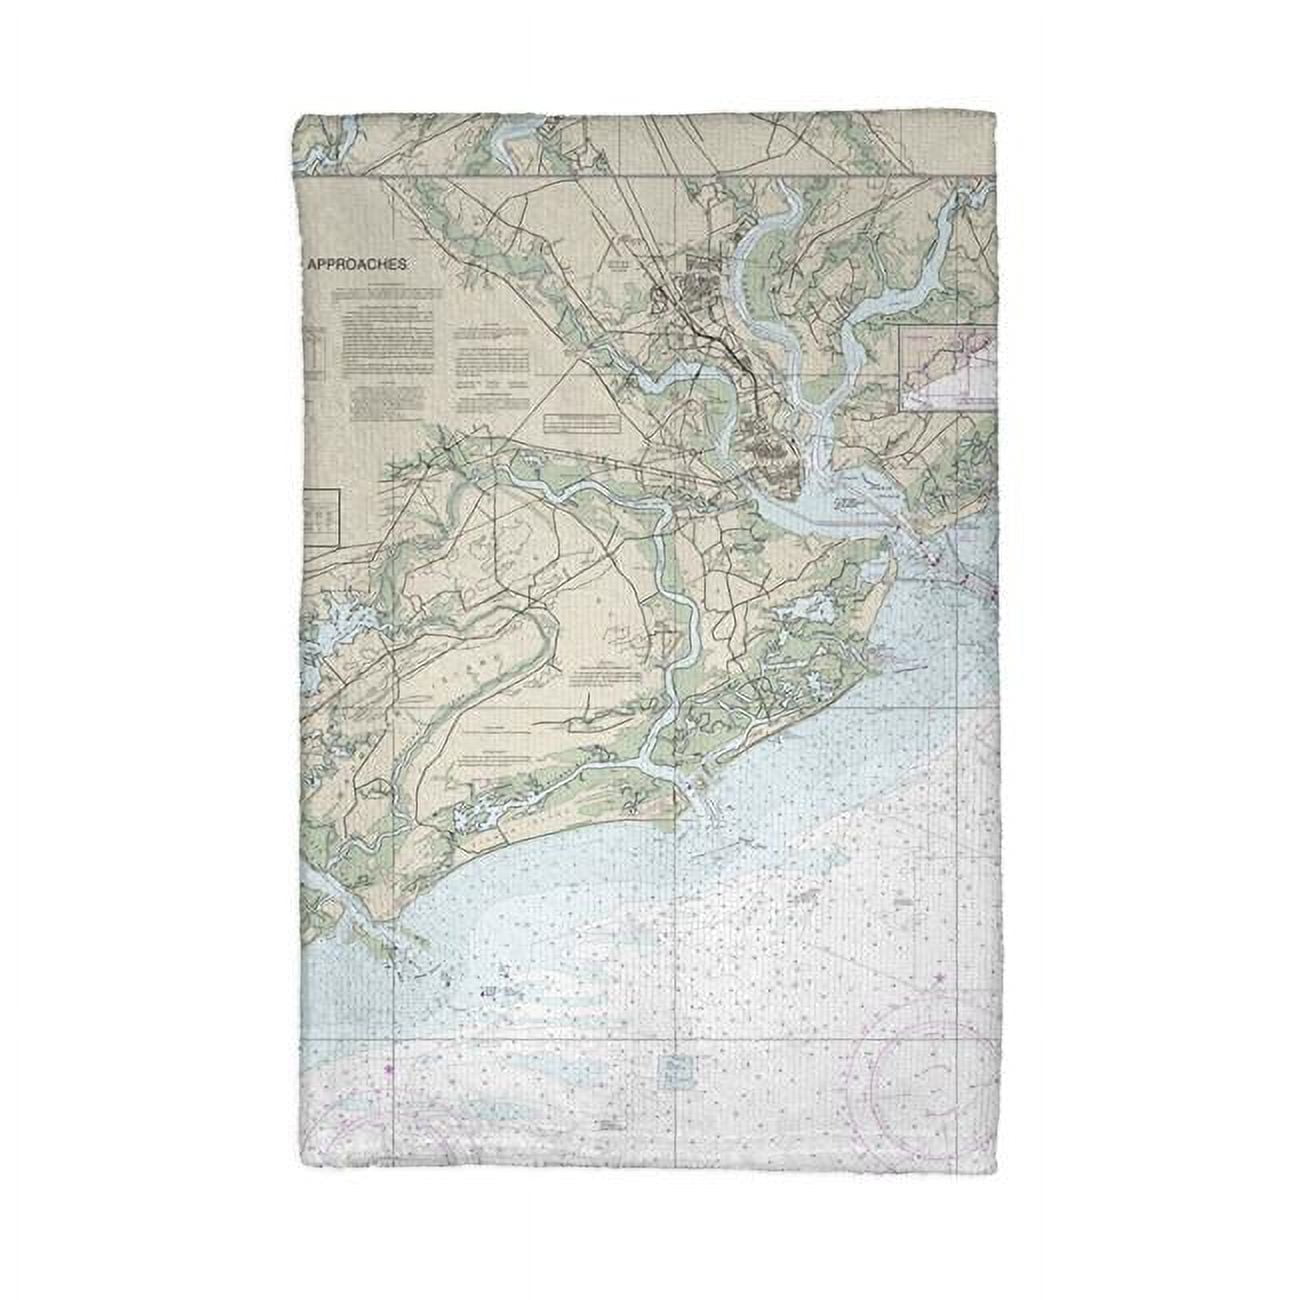 Charleston Harbor & Approaches, SC Nautical Map Kitchen Towel -  Better Blenders, BE2534233